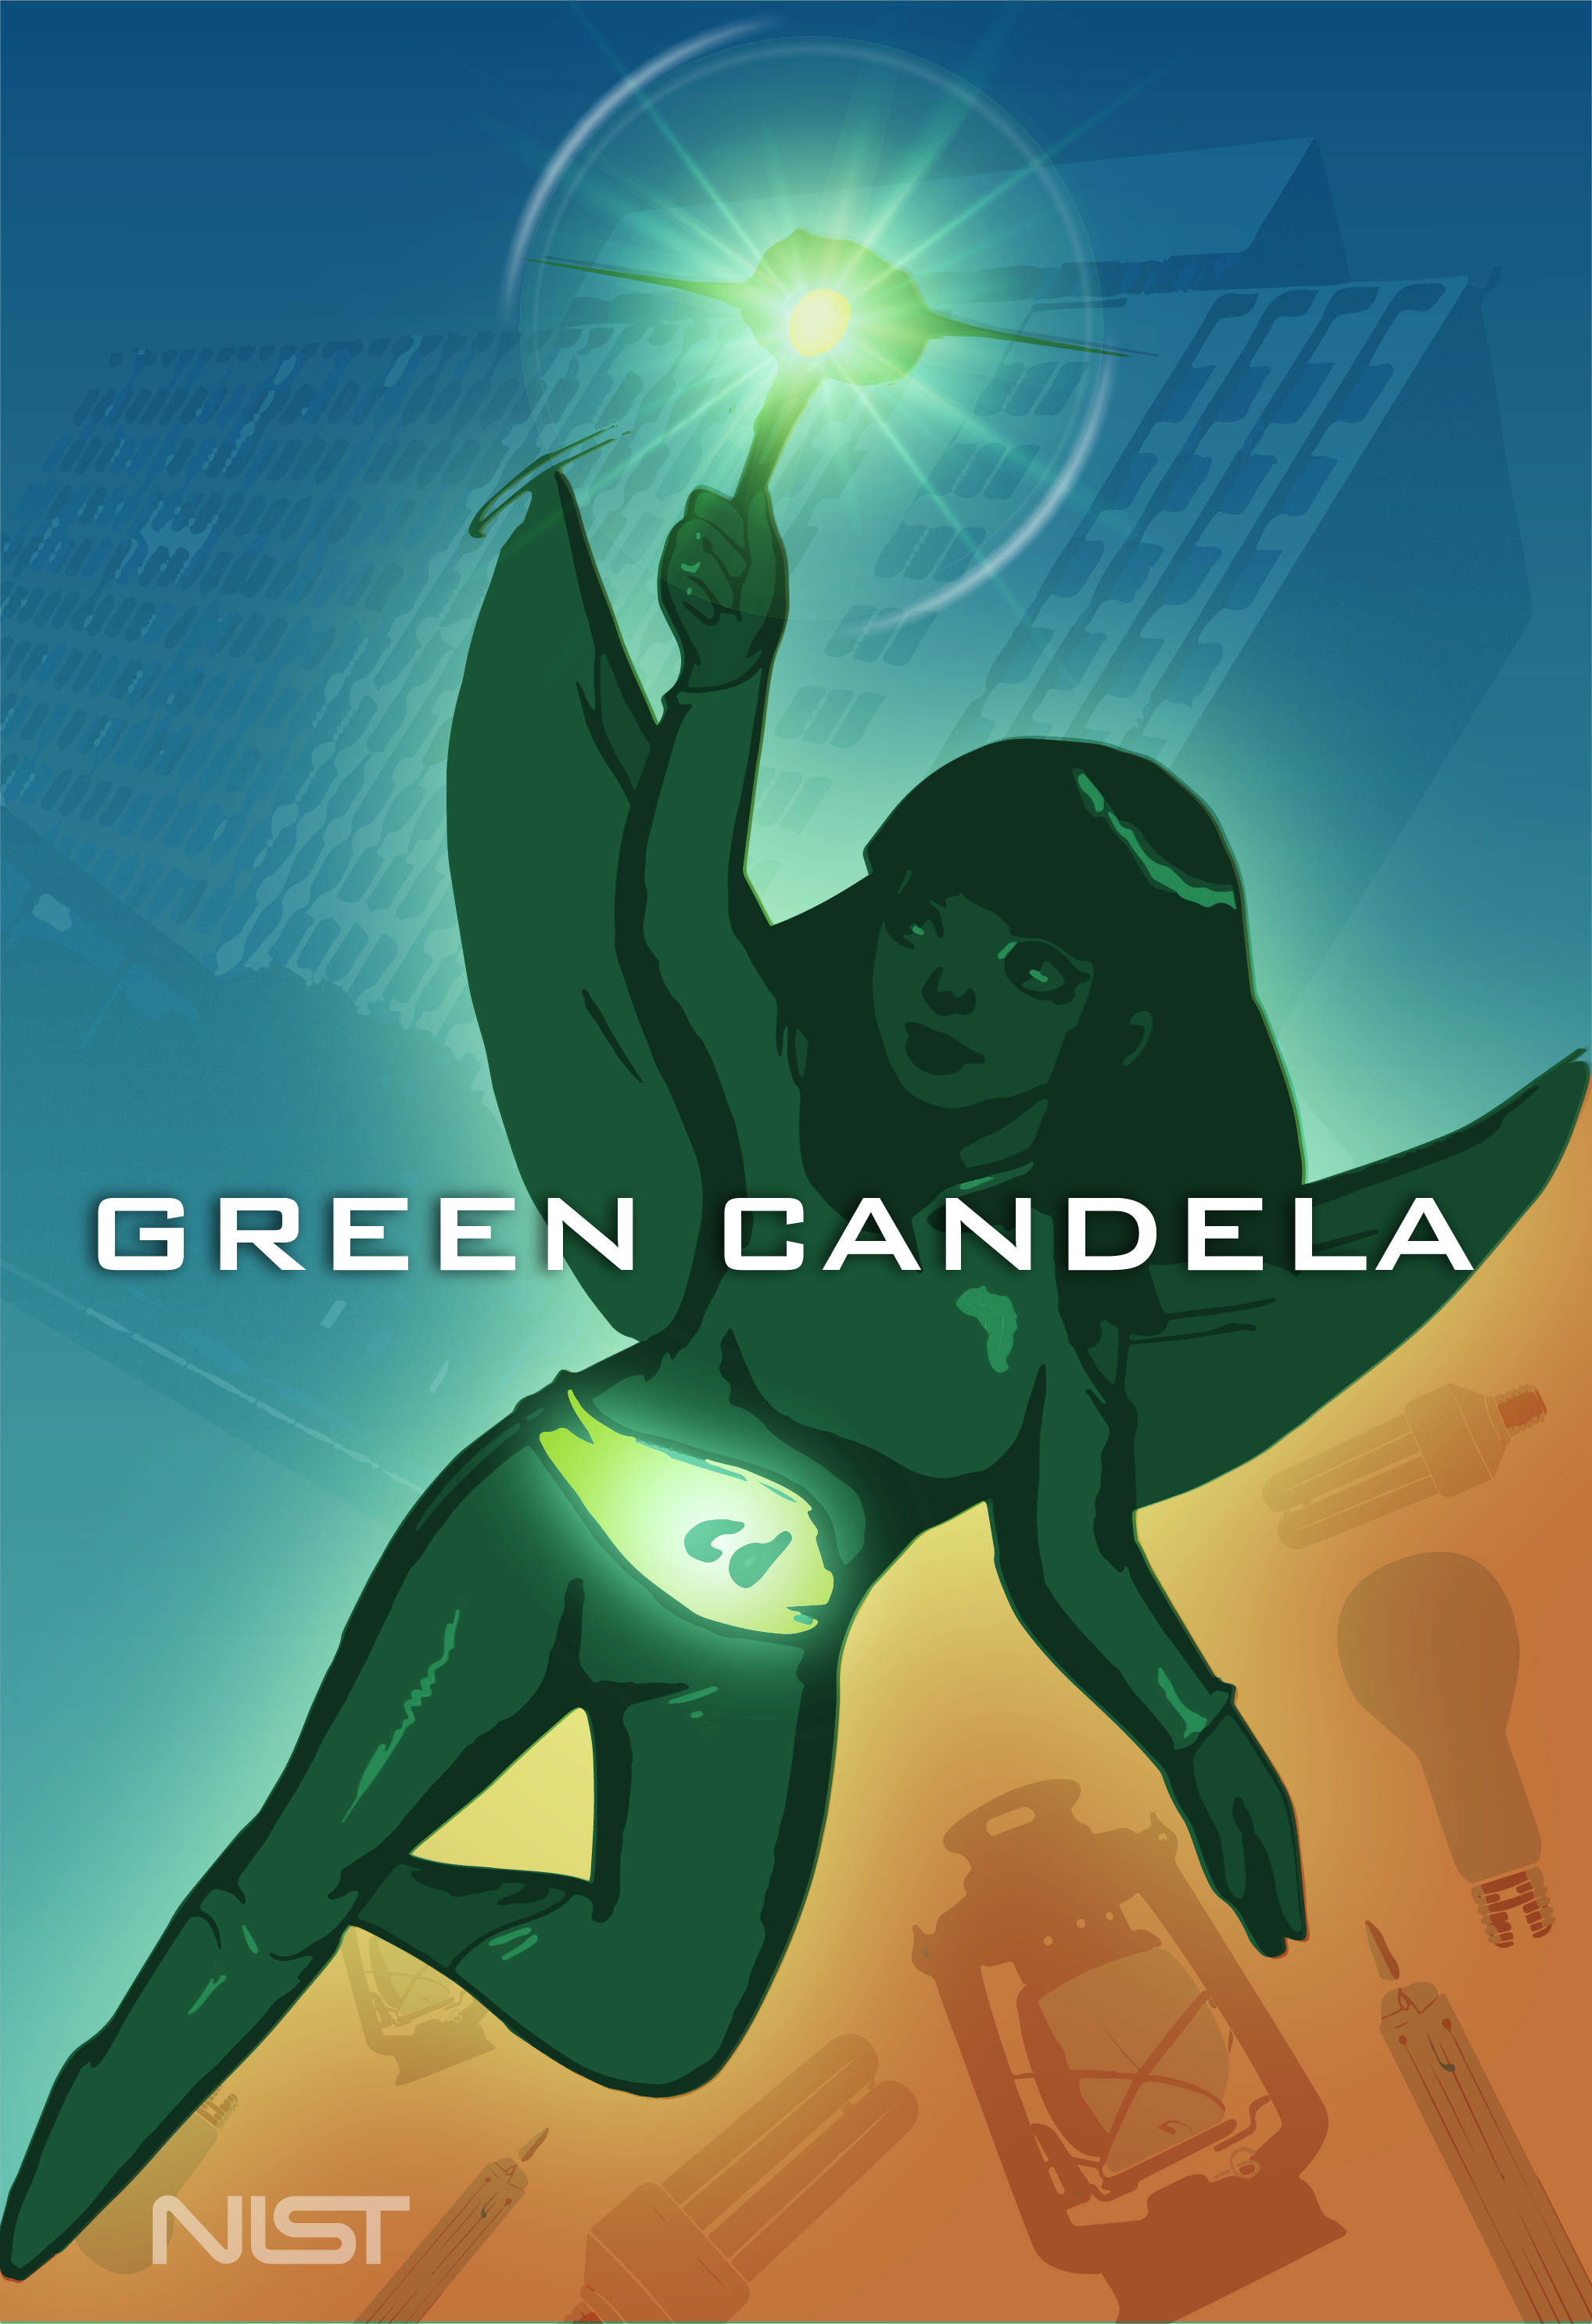 blue top half. faint buildings. yellow bottom right corner. faint outline of past ways we measured light. Candela superhero in green in middle. Words: Green Candela